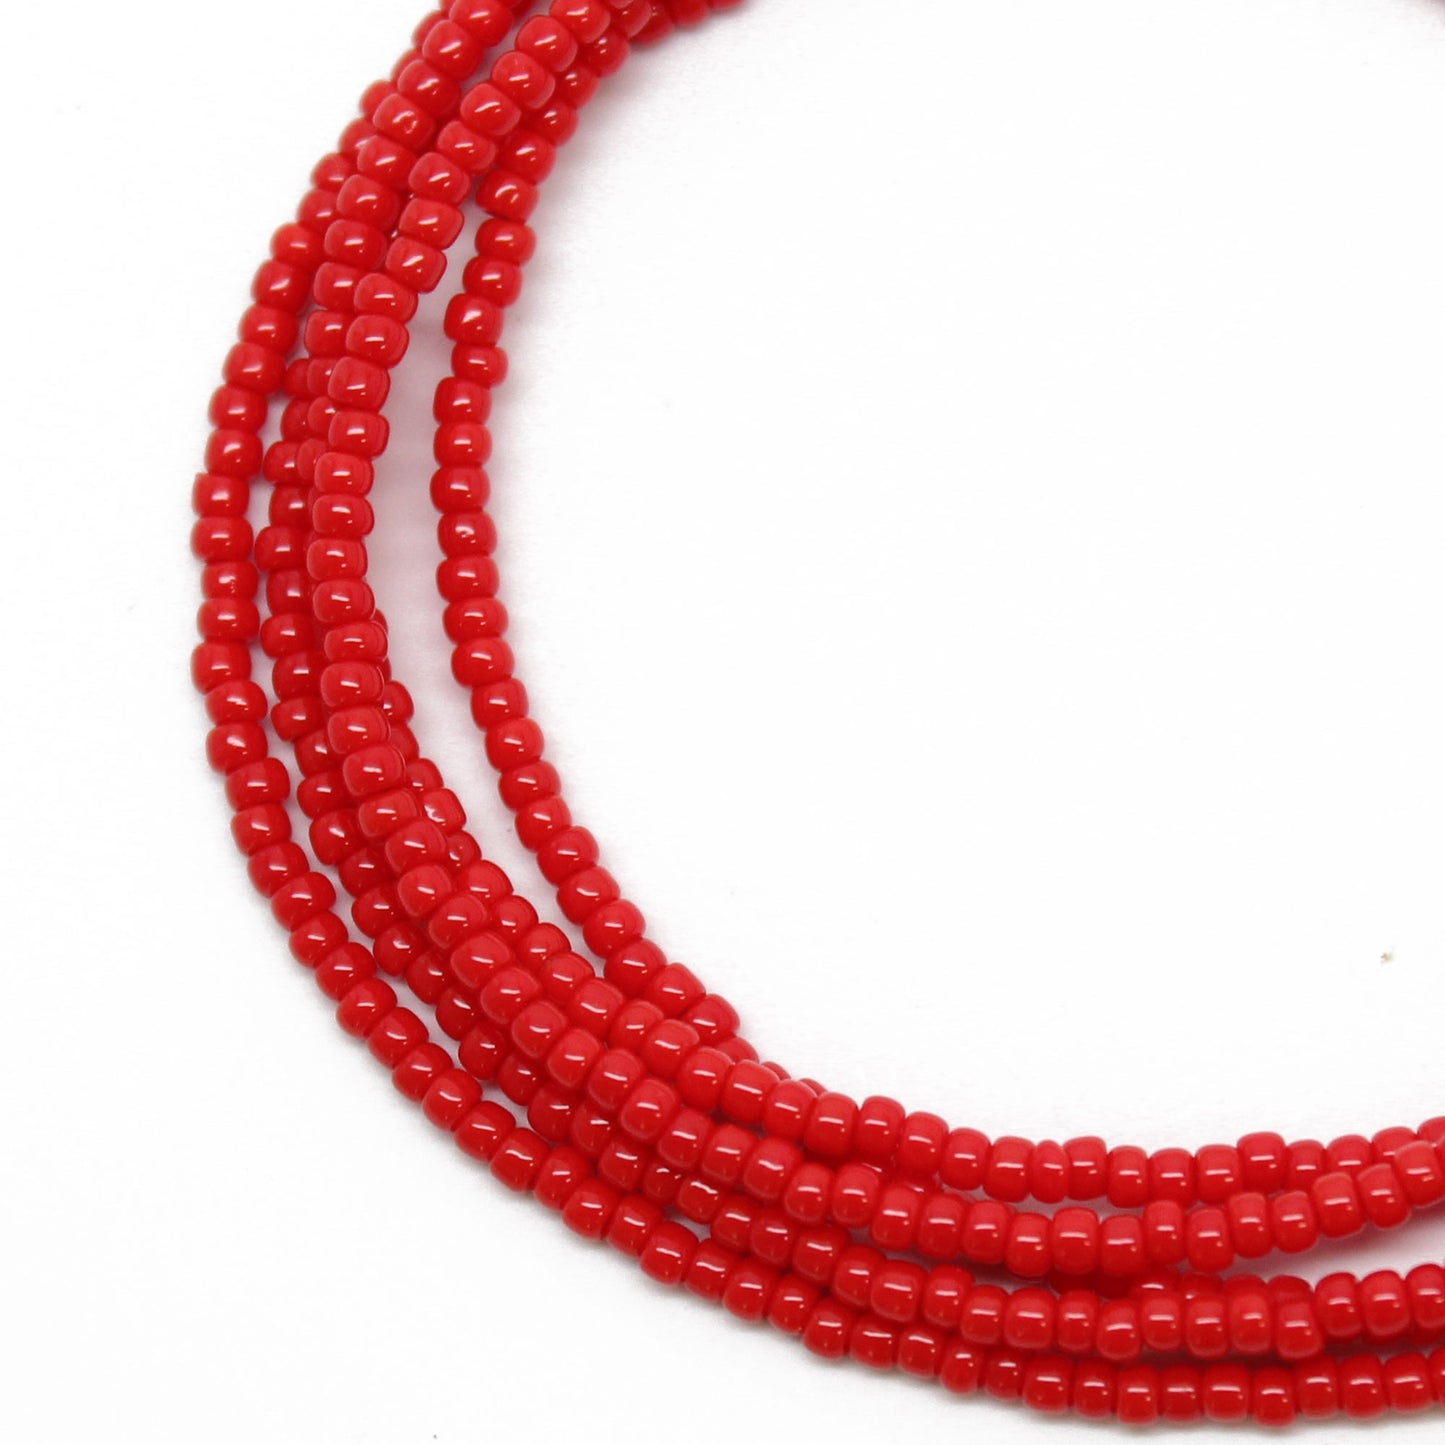 BIG BEAD ROUND RED NECKLACE - J. McVeigh Jewelry